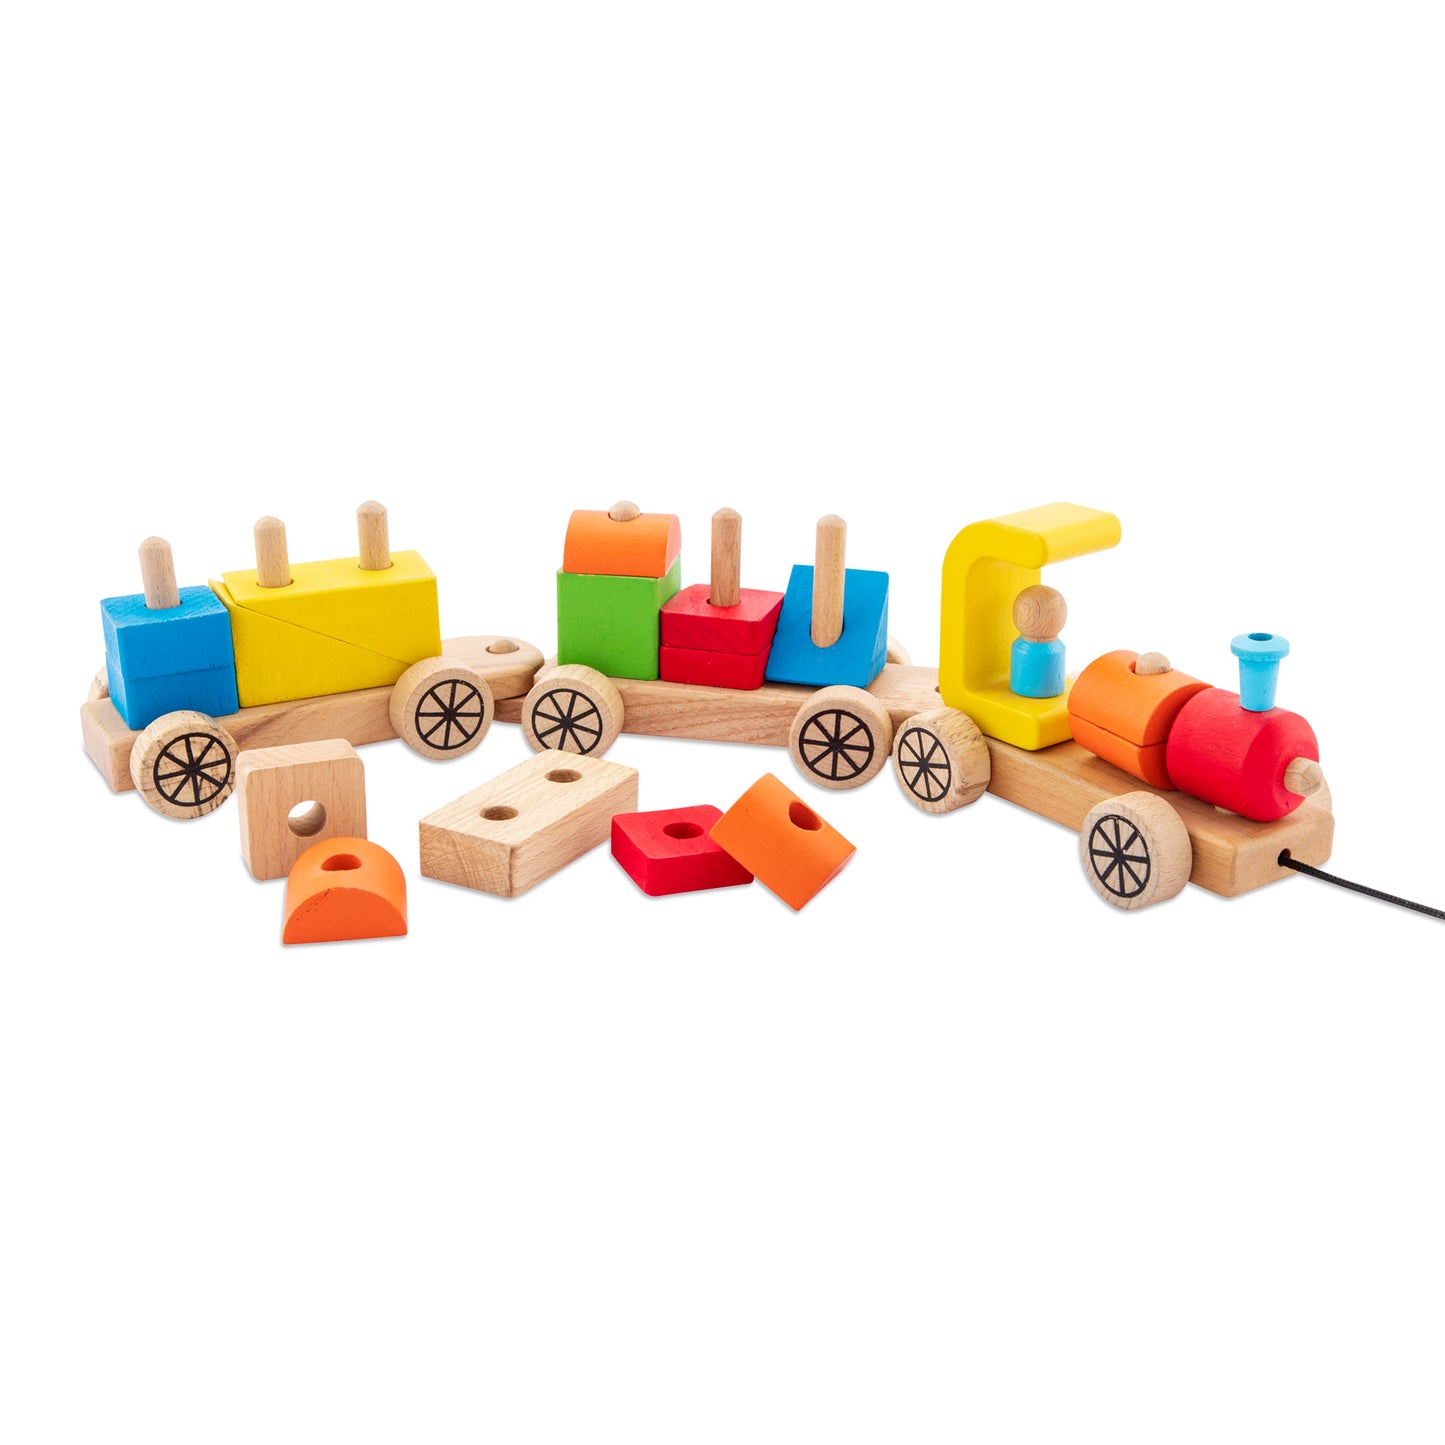 Wooden Building Block Train Pull Along Toy